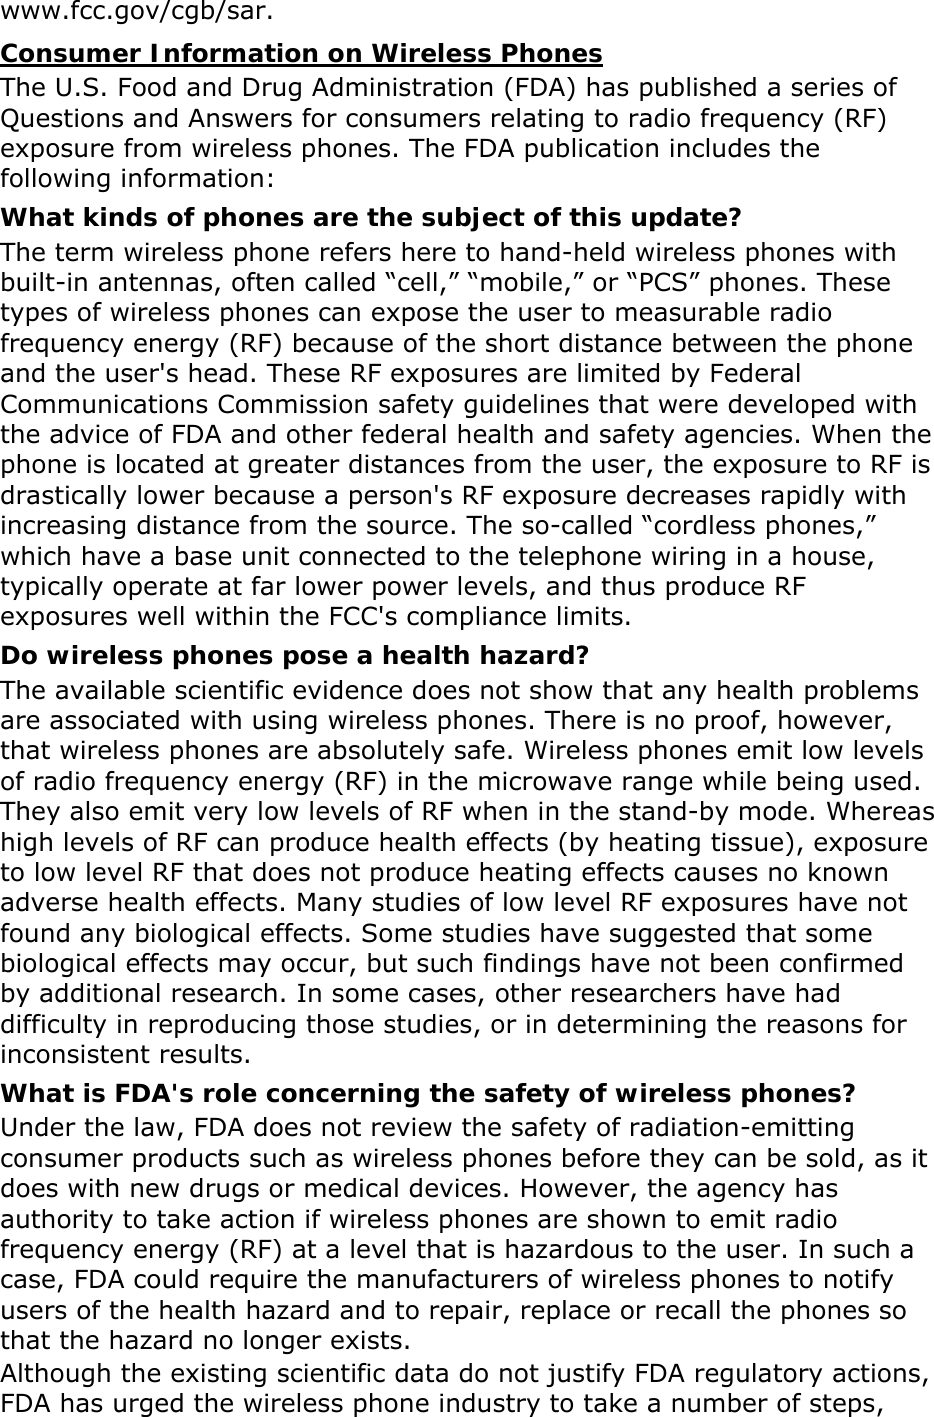 www.fcc.gov/cgb/sar. Consumer Information on Wireless Phones The U.S. Food and Drug Administration (FDA) has published a series of Questions and Answers for consumers relating to radio frequency (RF) exposure from wireless phones. The FDA publication includes the following information: What kinds of phones are the subject of this update? The term wireless phone refers here to hand-held wireless phones with built-in antennas, often called “cell,” “mobile,” or “PCS” phones. These types of wireless phones can expose the user to measurable radio frequency energy (RF) because of the short distance between the phone and the user&apos;s head. These RF exposures are limited by Federal Communications Commission safety guidelines that were developed with the advice of FDA and other federal health and safety agencies. When the phone is located at greater distances from the user, the exposure to RF is drastically lower because a person&apos;s RF exposure decreases rapidly with increasing distance from the source. The so-called “cordless phones,” which have a base unit connected to the telephone wiring in a house, typically operate at far lower power levels, and thus produce RF exposures well within the FCC&apos;s compliance limits. Do wireless phones pose a health hazard? The available scientific evidence does not show that any health problems are associated with using wireless phones. There is no proof, however, that wireless phones are absolutely safe. Wireless phones emit low levels of radio frequency energy (RF) in the microwave range while being used. They also emit very low levels of RF when in the stand-by mode. Whereas high levels of RF can produce health effects (by heating tissue), exposure to low level RF that does not produce heating effects causes no known adverse health effects. Many studies of low level RF exposures have not found any biological effects. Some studies have suggested that some biological effects may occur, but such findings have not been confirmed by additional research. In some cases, other researchers have had difficulty in reproducing those studies, or in determining the reasons for inconsistent results. What is FDA&apos;s role concerning the safety of wireless phones? Under the law, FDA does not review the safety of radiation-emitting consumer products such as wireless phones before they can be sold, as it does with new drugs or medical devices. However, the agency has authority to take action if wireless phones are shown to emit radio frequency energy (RF) at a level that is hazardous to the user. In such a case, FDA could require the manufacturers of wireless phones to notify users of the health hazard and to repair, replace or recall the phones so that the hazard no longer exists. Although the existing scientific data do not justify FDA regulatory actions, FDA has urged the wireless phone industry to take a number of steps, 